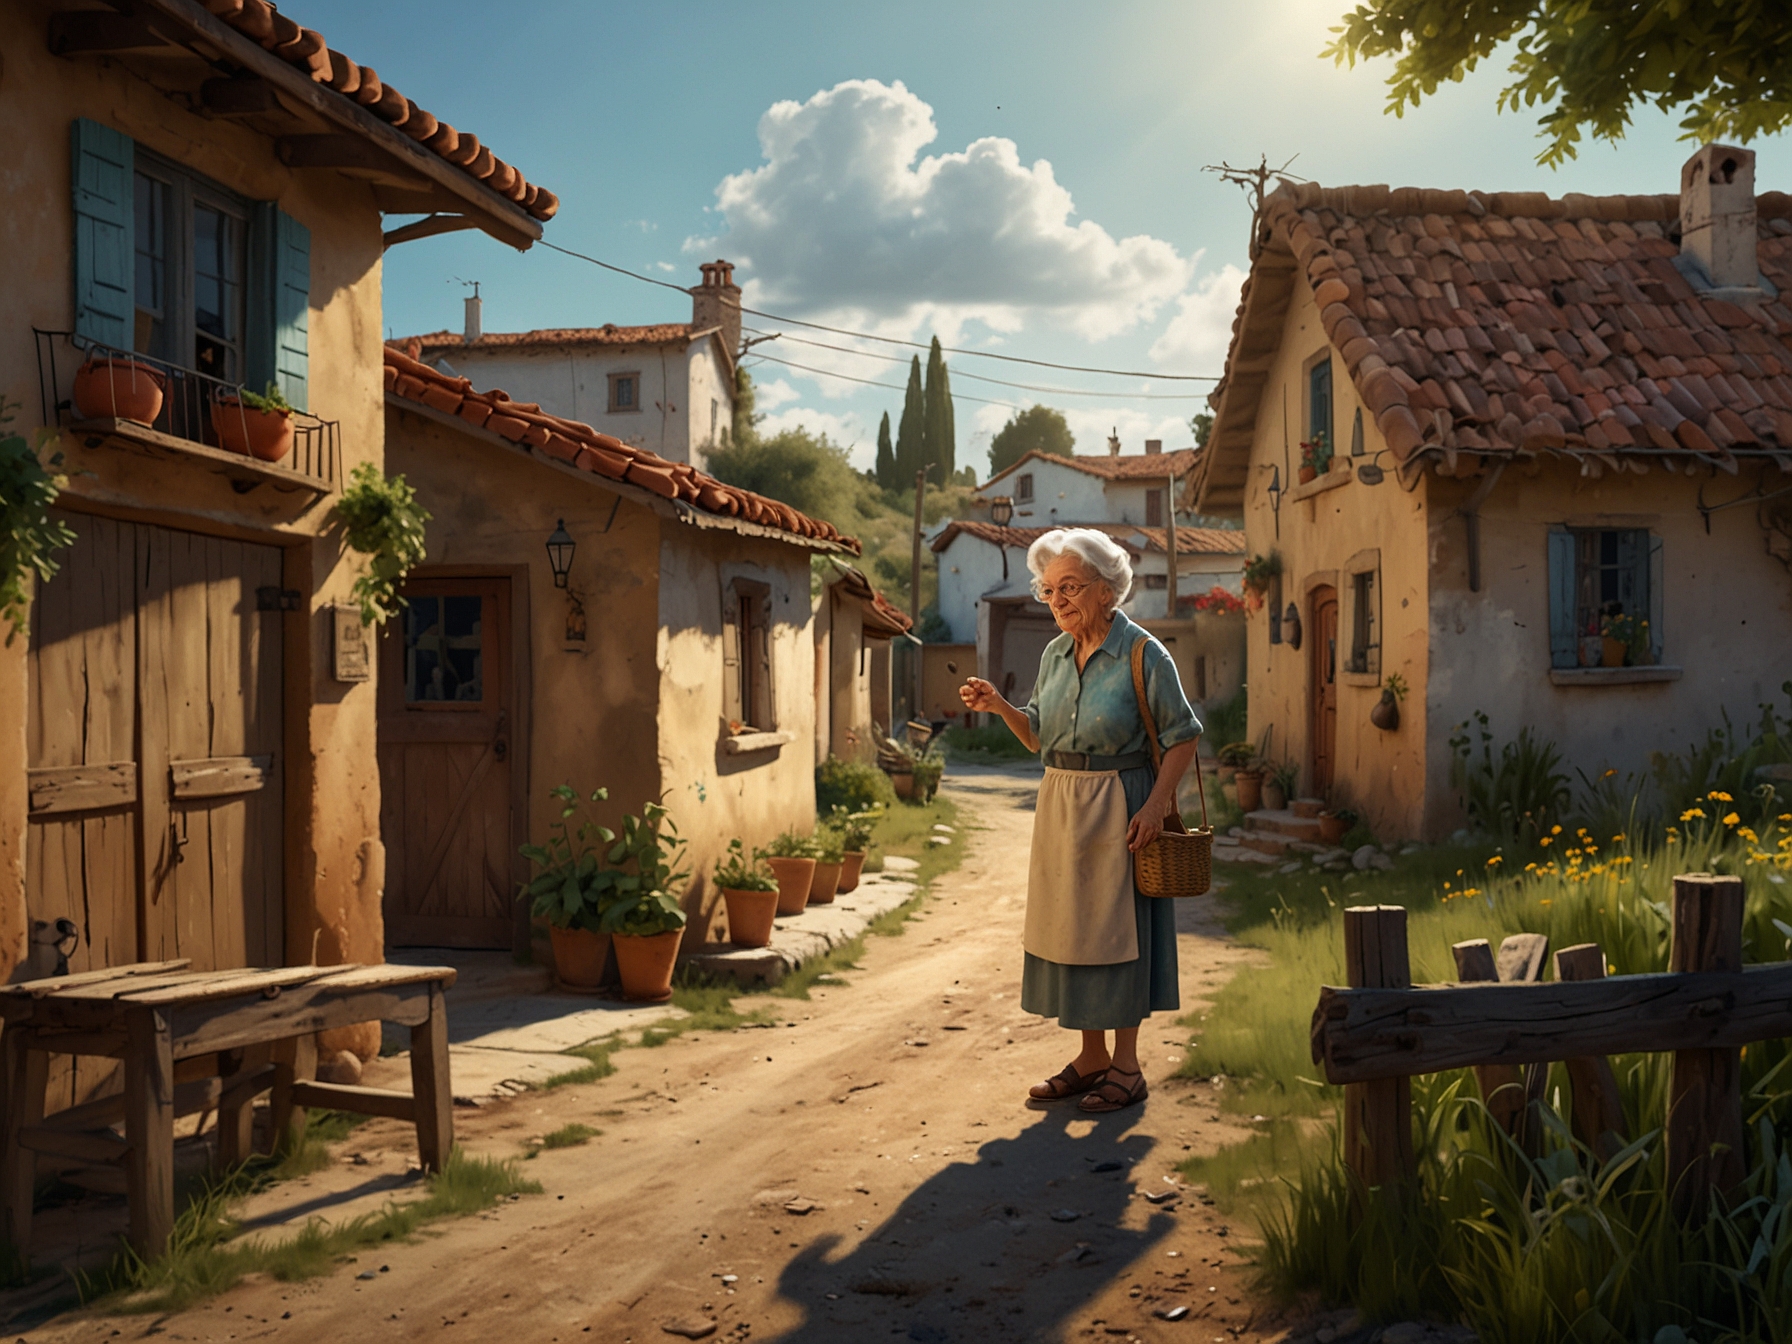 A whimsical scene where Rita, the mischievous elderly protagonist, interacts with her skeptical neighbors in the quaint Argentinian village, highlighting her quirky personality and rule-bending tactics.